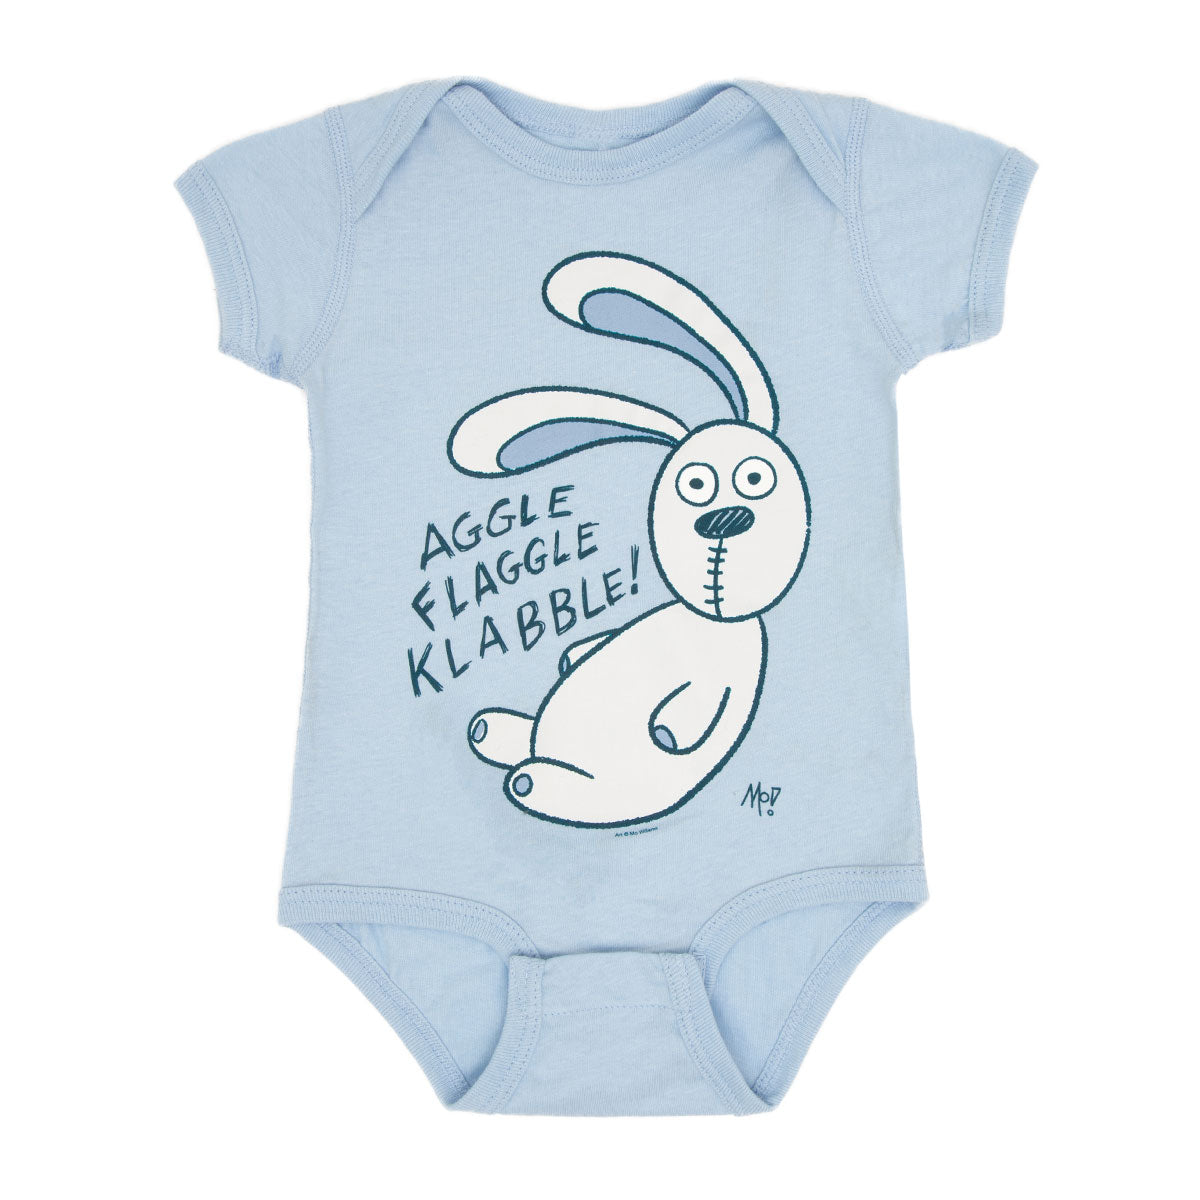 Knuffle bunny baby bodysuit â out of print